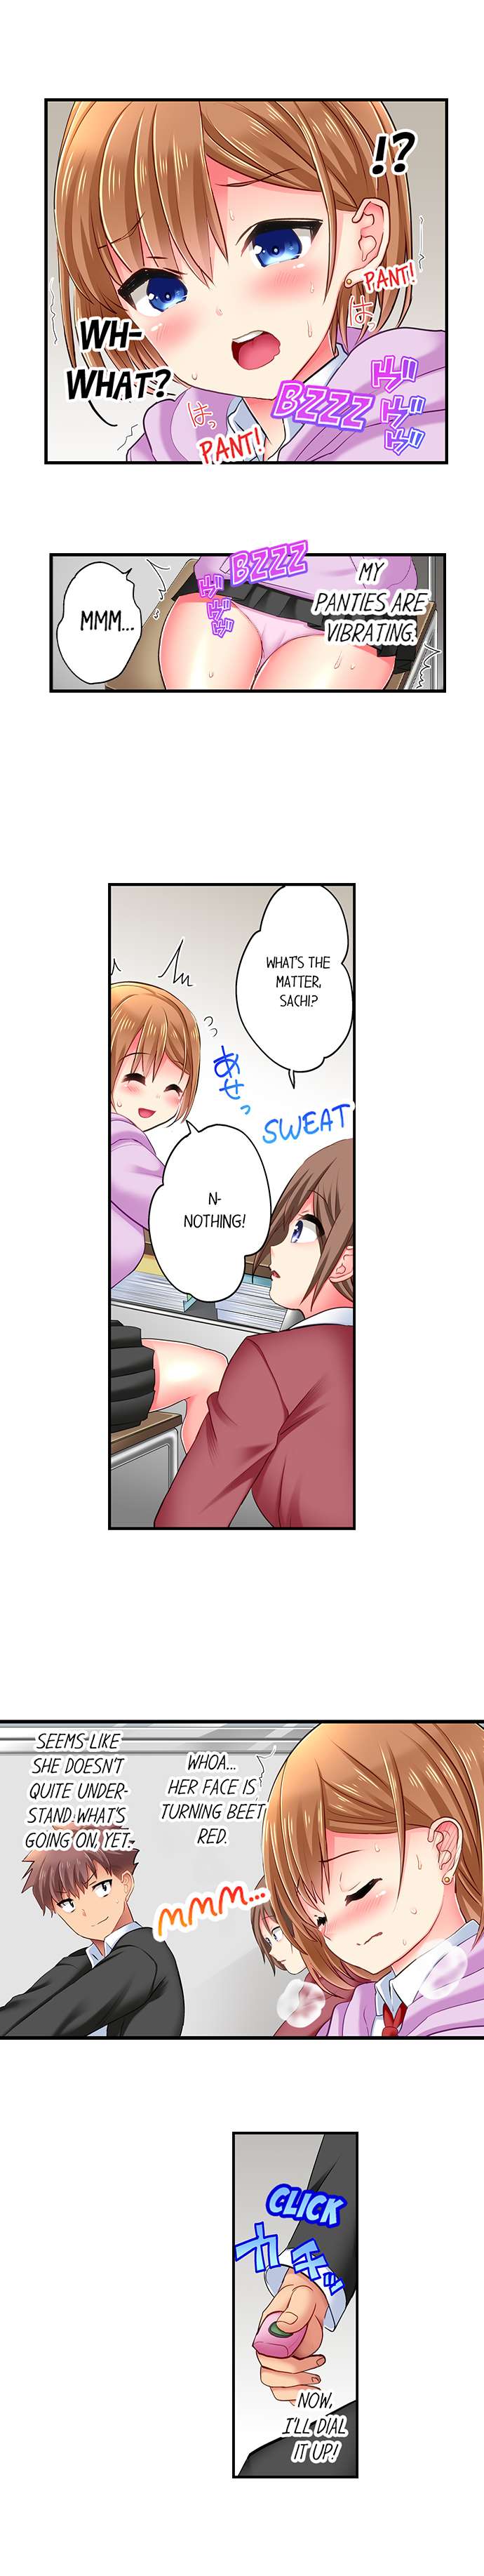 Sex in the Adult Toys Section - Chapter 5 Page 4